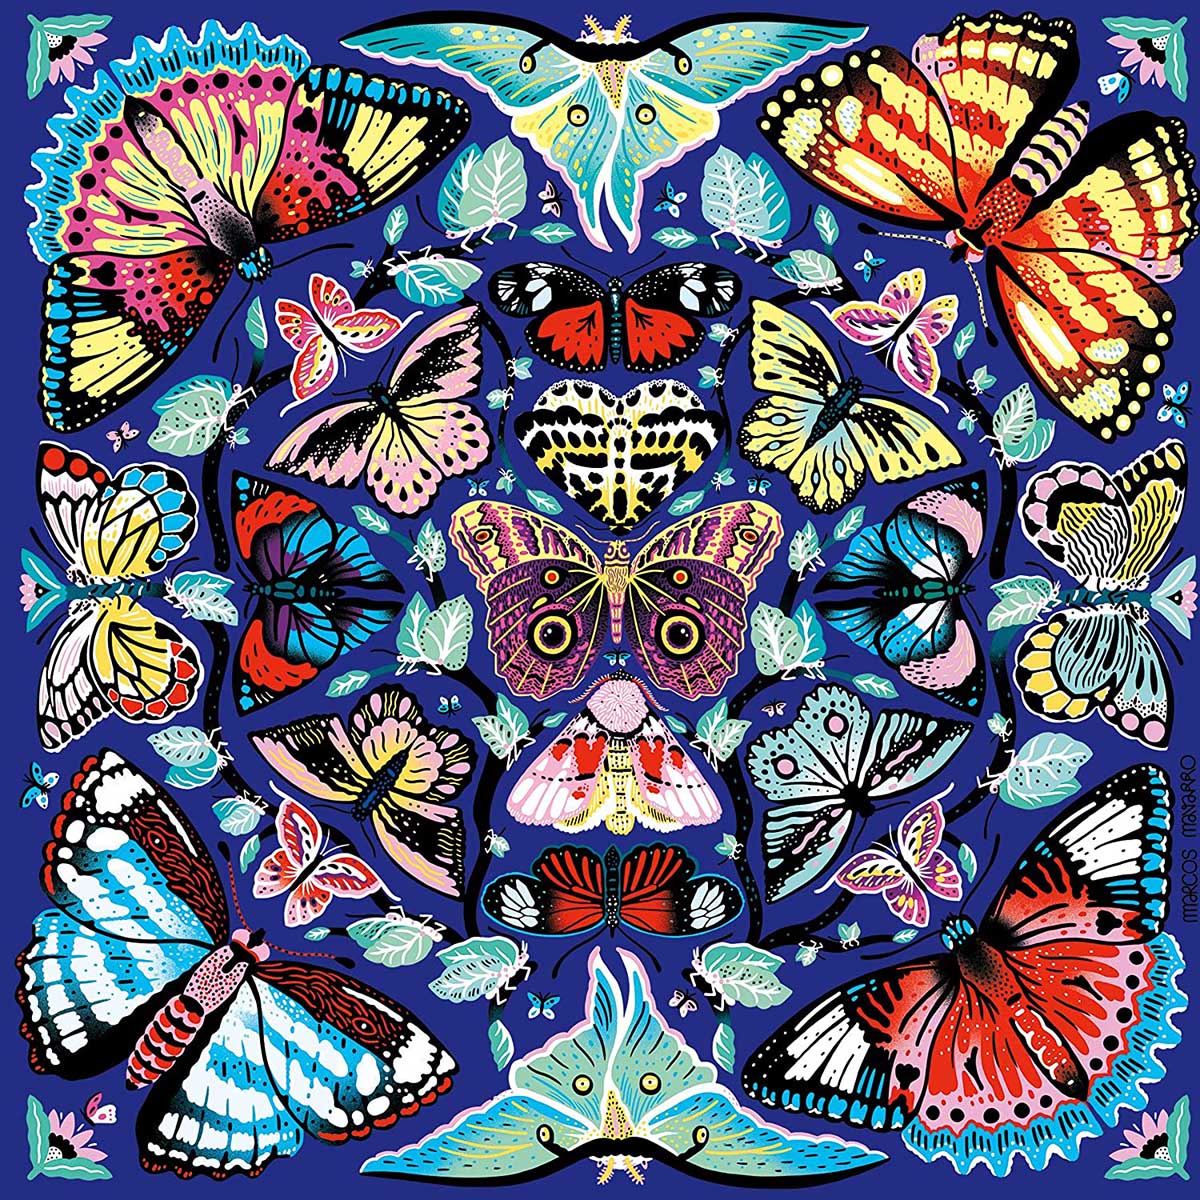 Kaleido-Butterflies Butterflies and Insects Jigsaw Puzzle